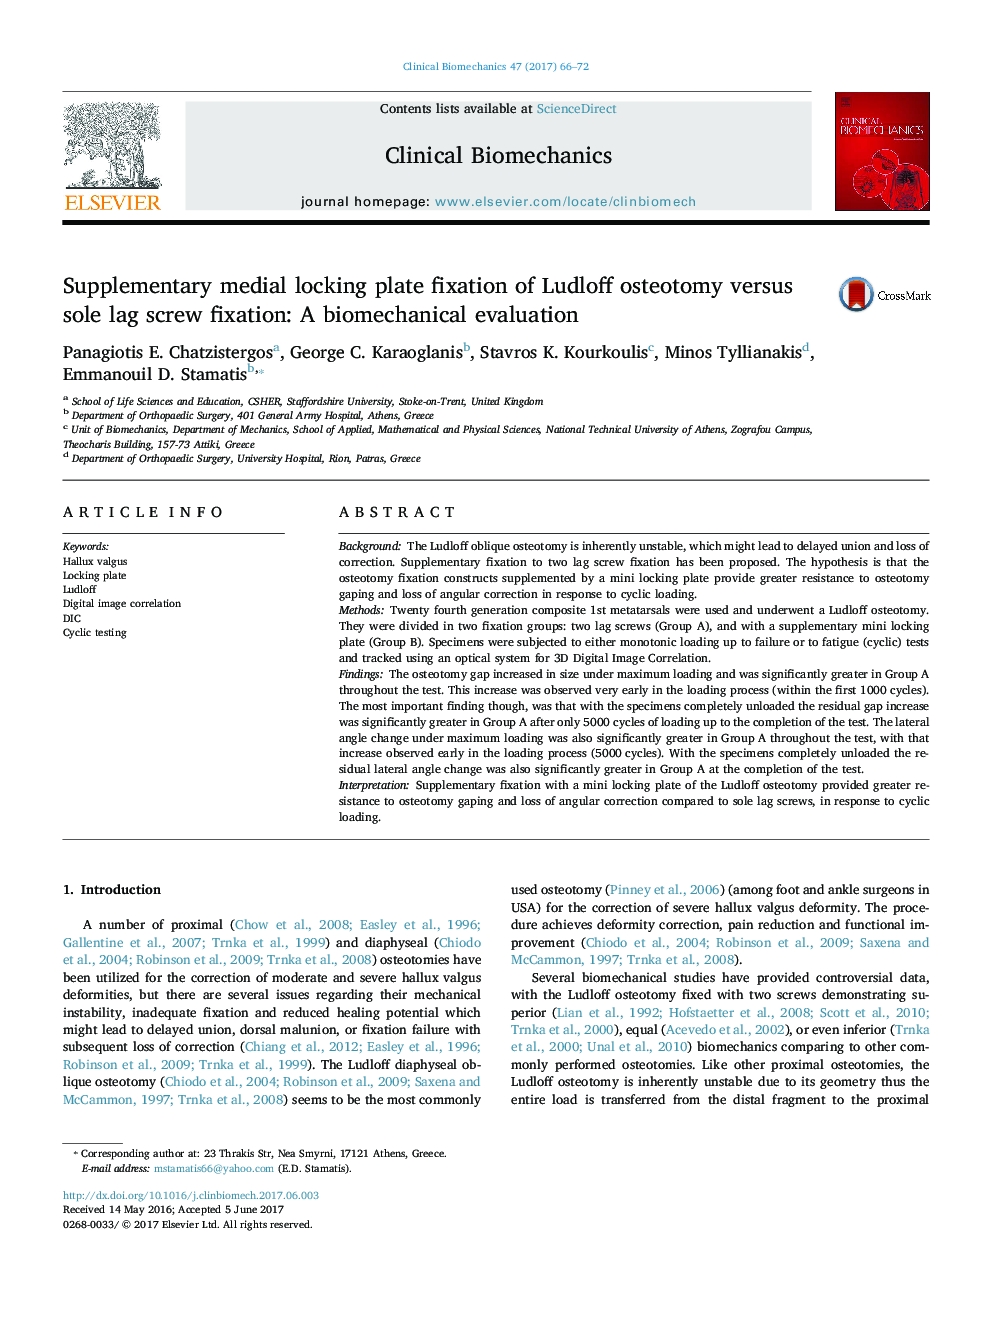 Supplementary medial locking plate fixation of Ludloff osteotomy versus sole lag screw fixation: A biomechanical evaluation